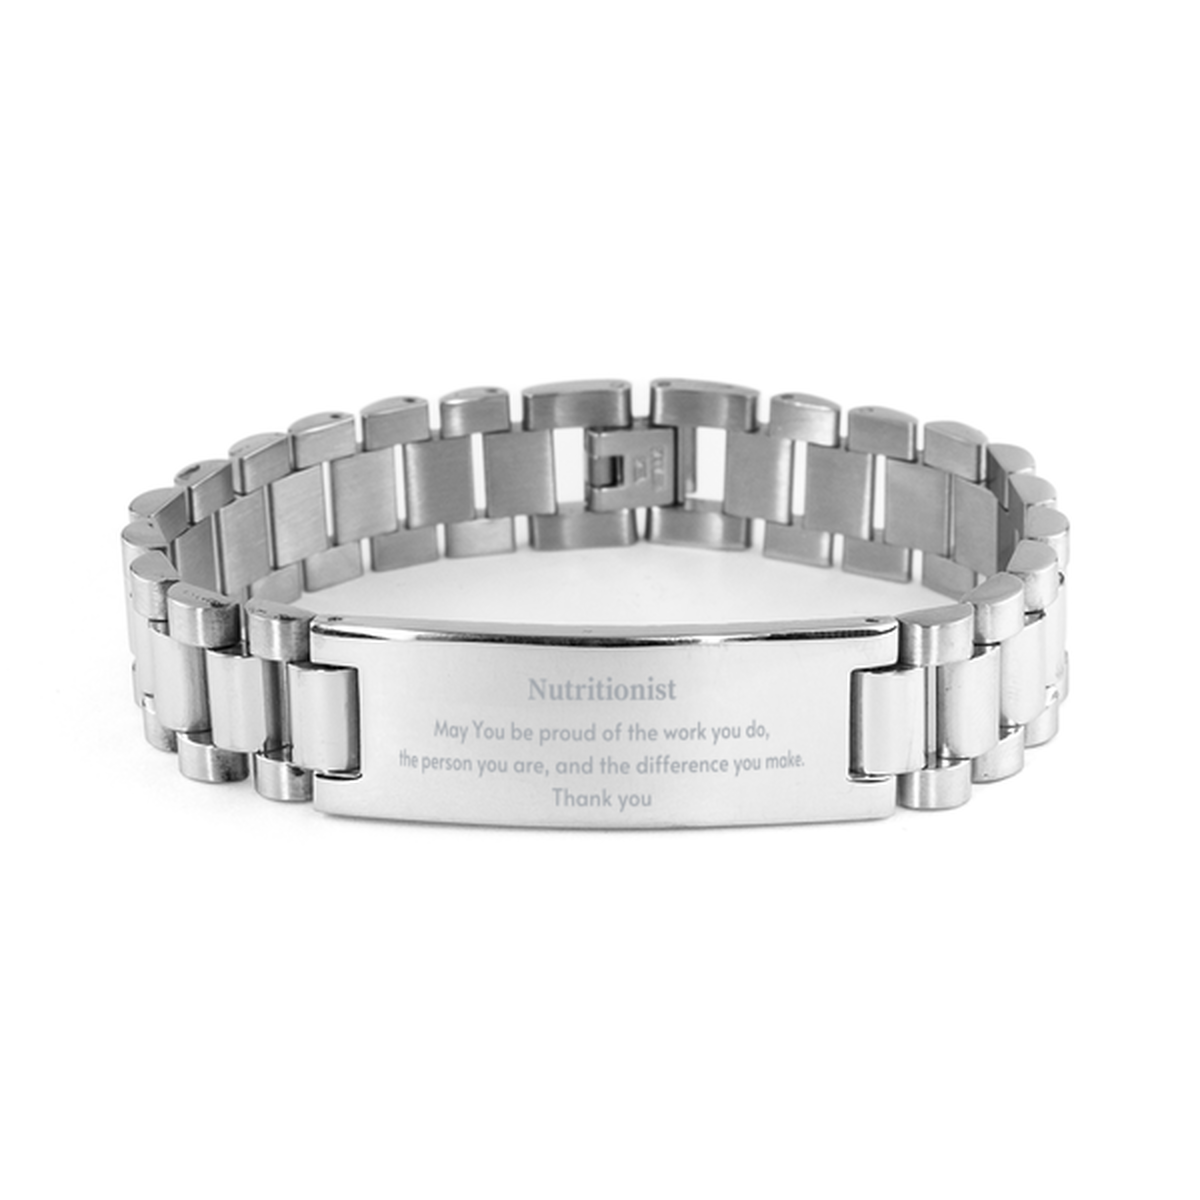 Heartwarming Ladder Stainless Steel Bracelet Retirement Coworkers Gifts for Nutritionist, Nutritionist May You be proud of the work you do, the person you are Gifts for Boss Men Women Friends